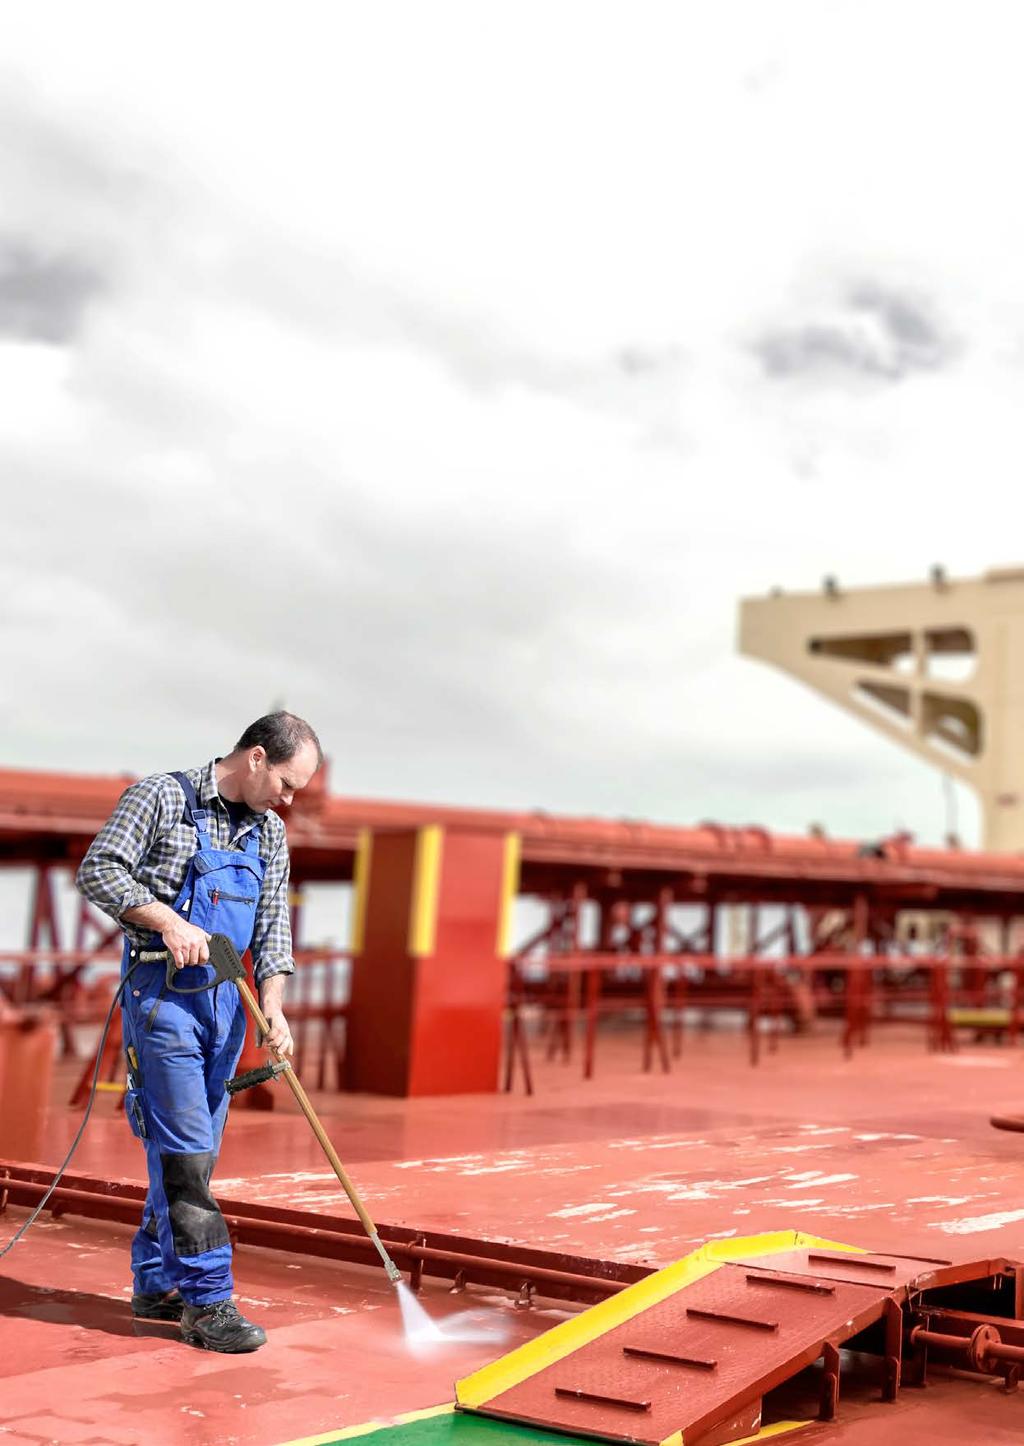 Clean while on the move Whilst in transit, keep your ship clean and well maintained with equipment you can rely on. Day after day.